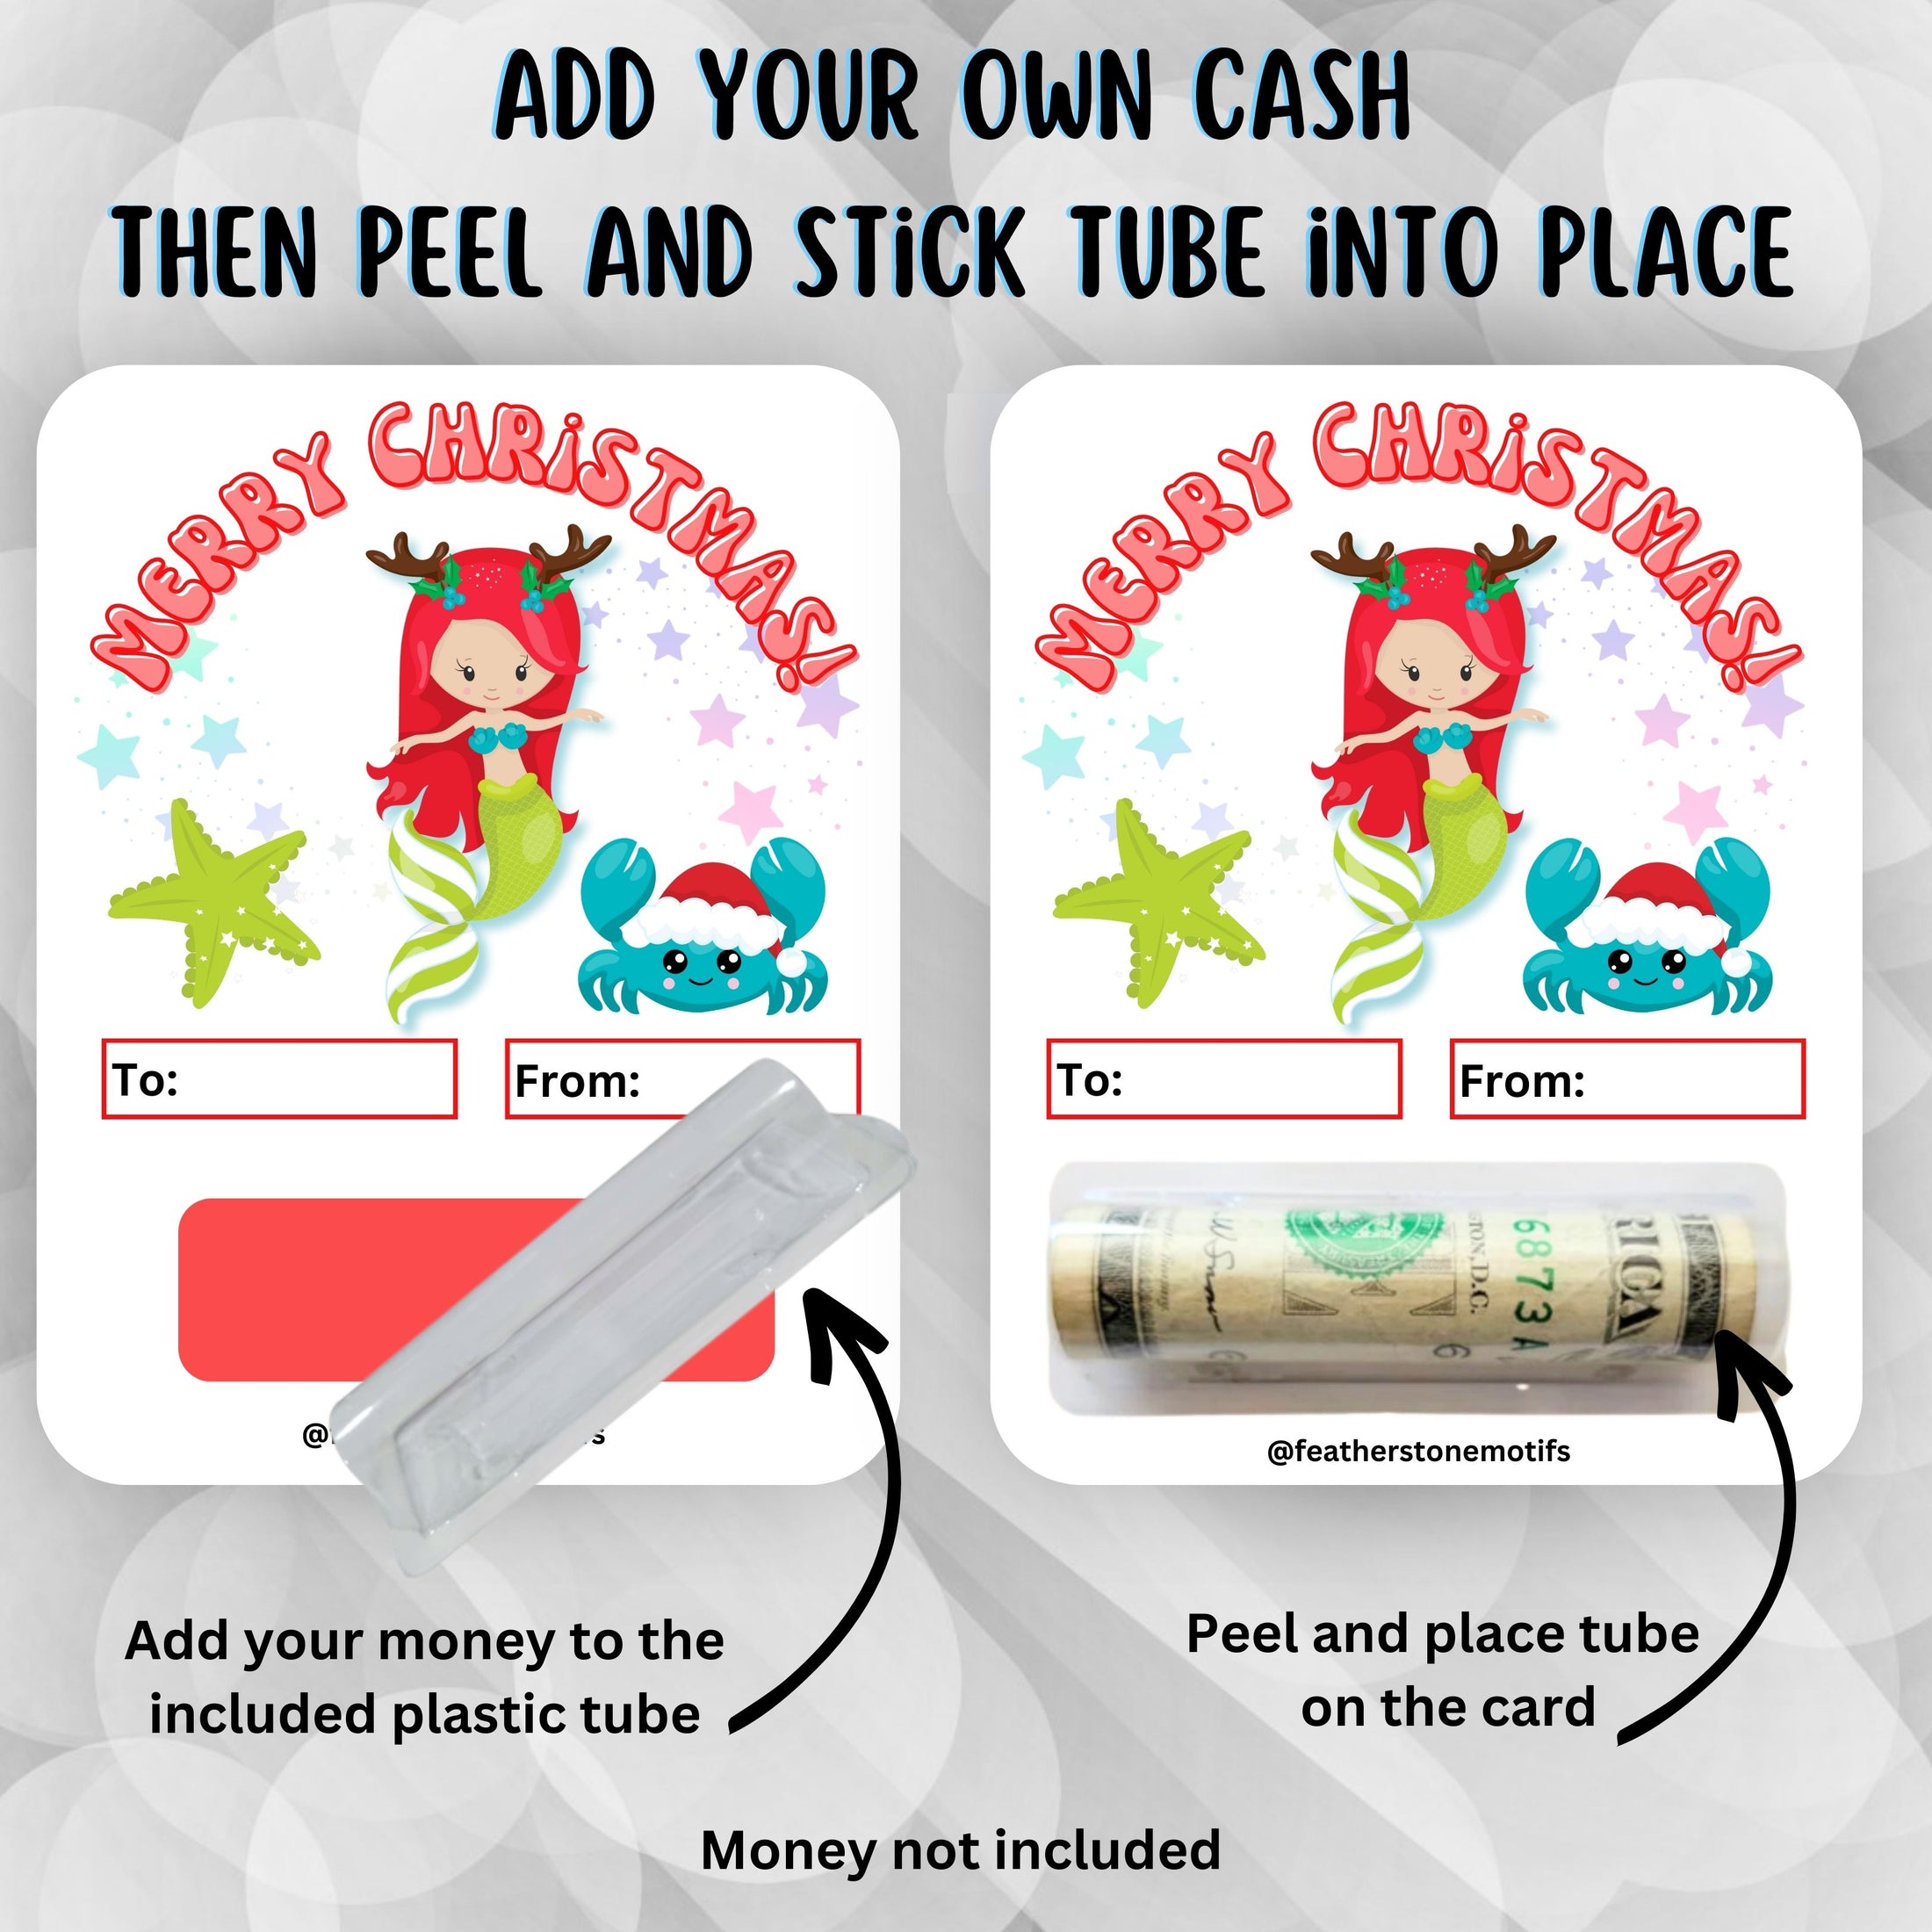 This image shows how to attach the money tube to the Mermaid money card.